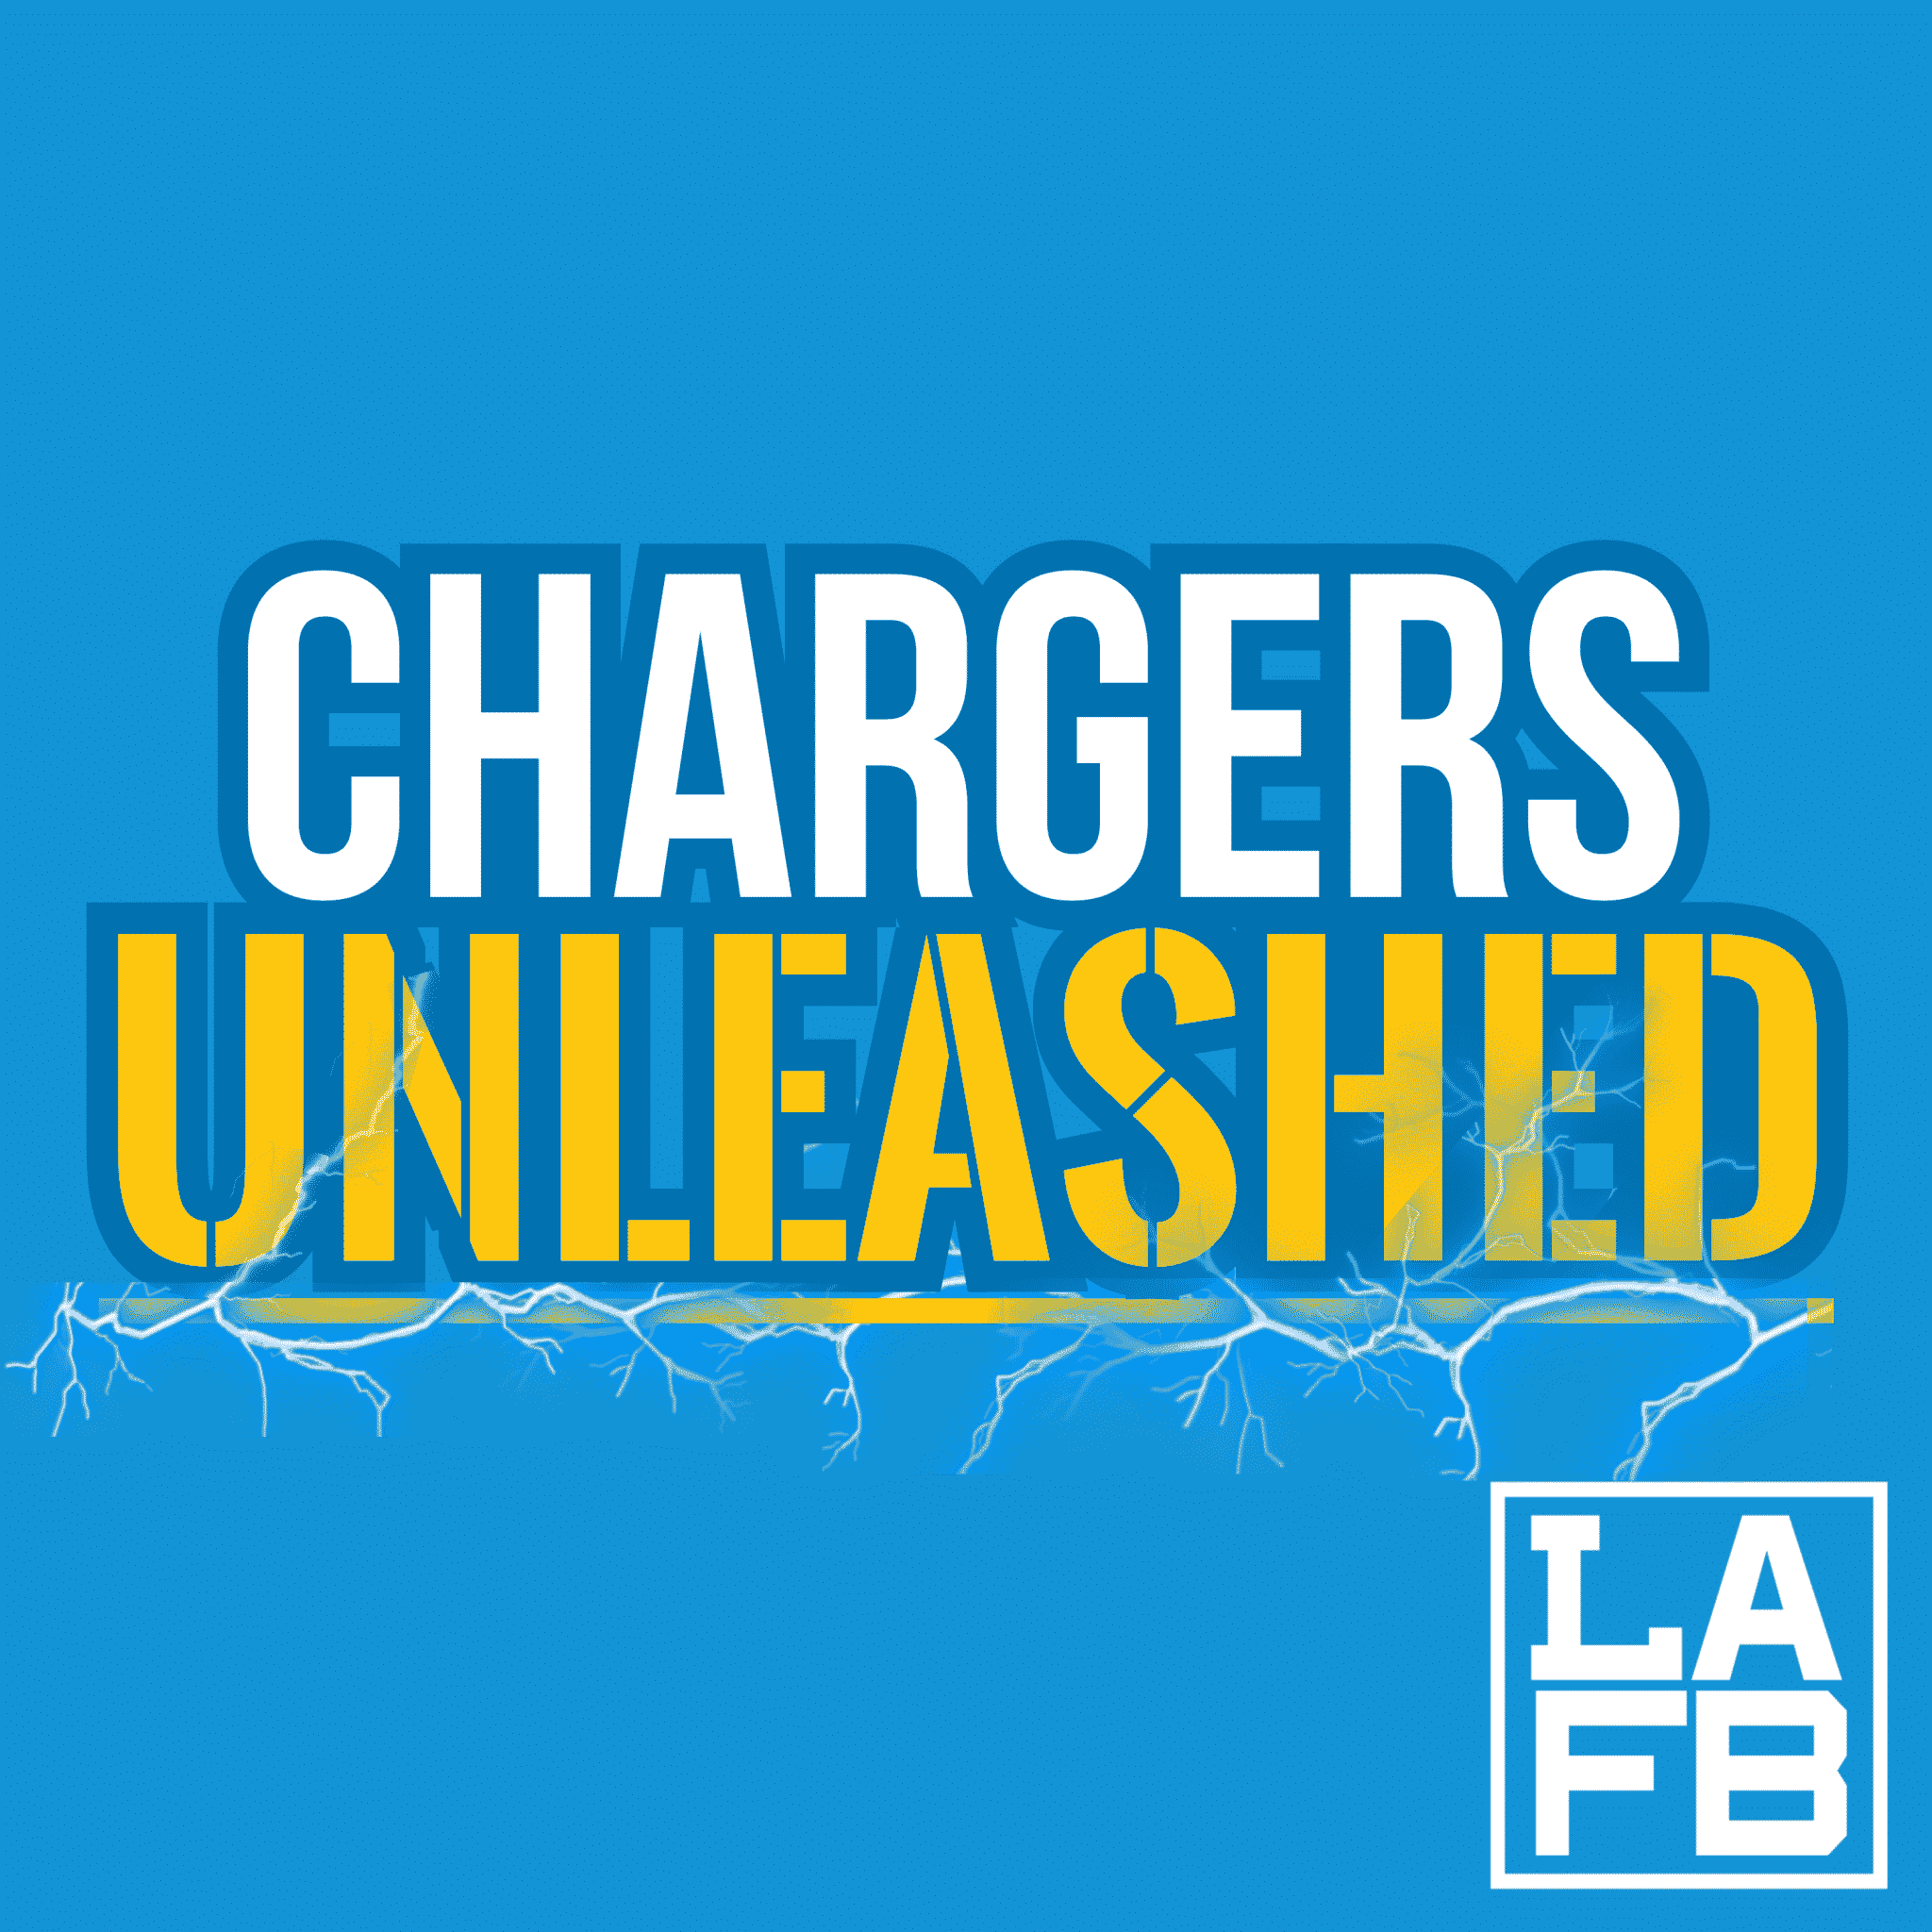 Chargers Unleashed Podcast: Chargers vs Chiefs Week 15 Preview: Matchups & Predictions | Herbert vs Mahomes | Fight For AFC West